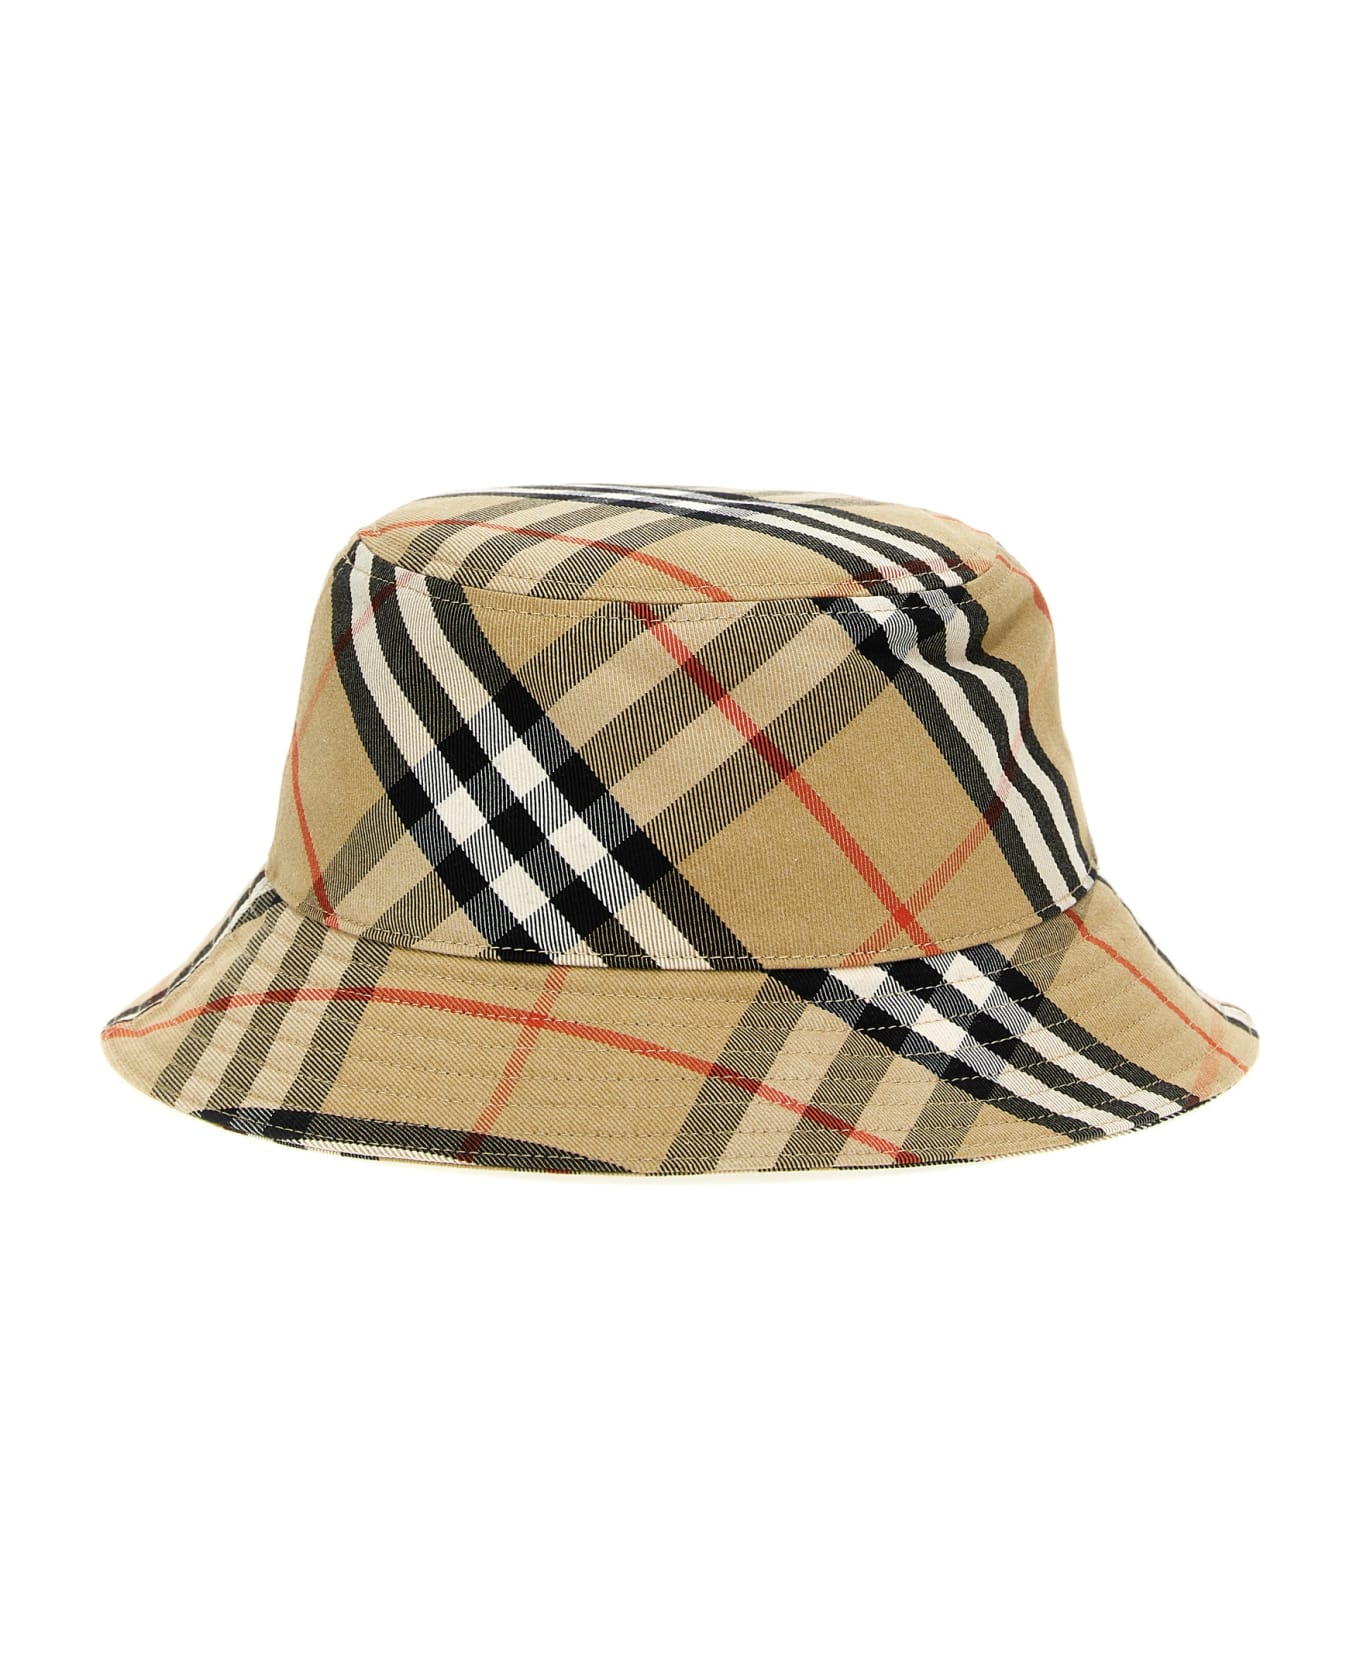 Burberry Logo Embroidery Check Bucket Hat - Beige 帽子